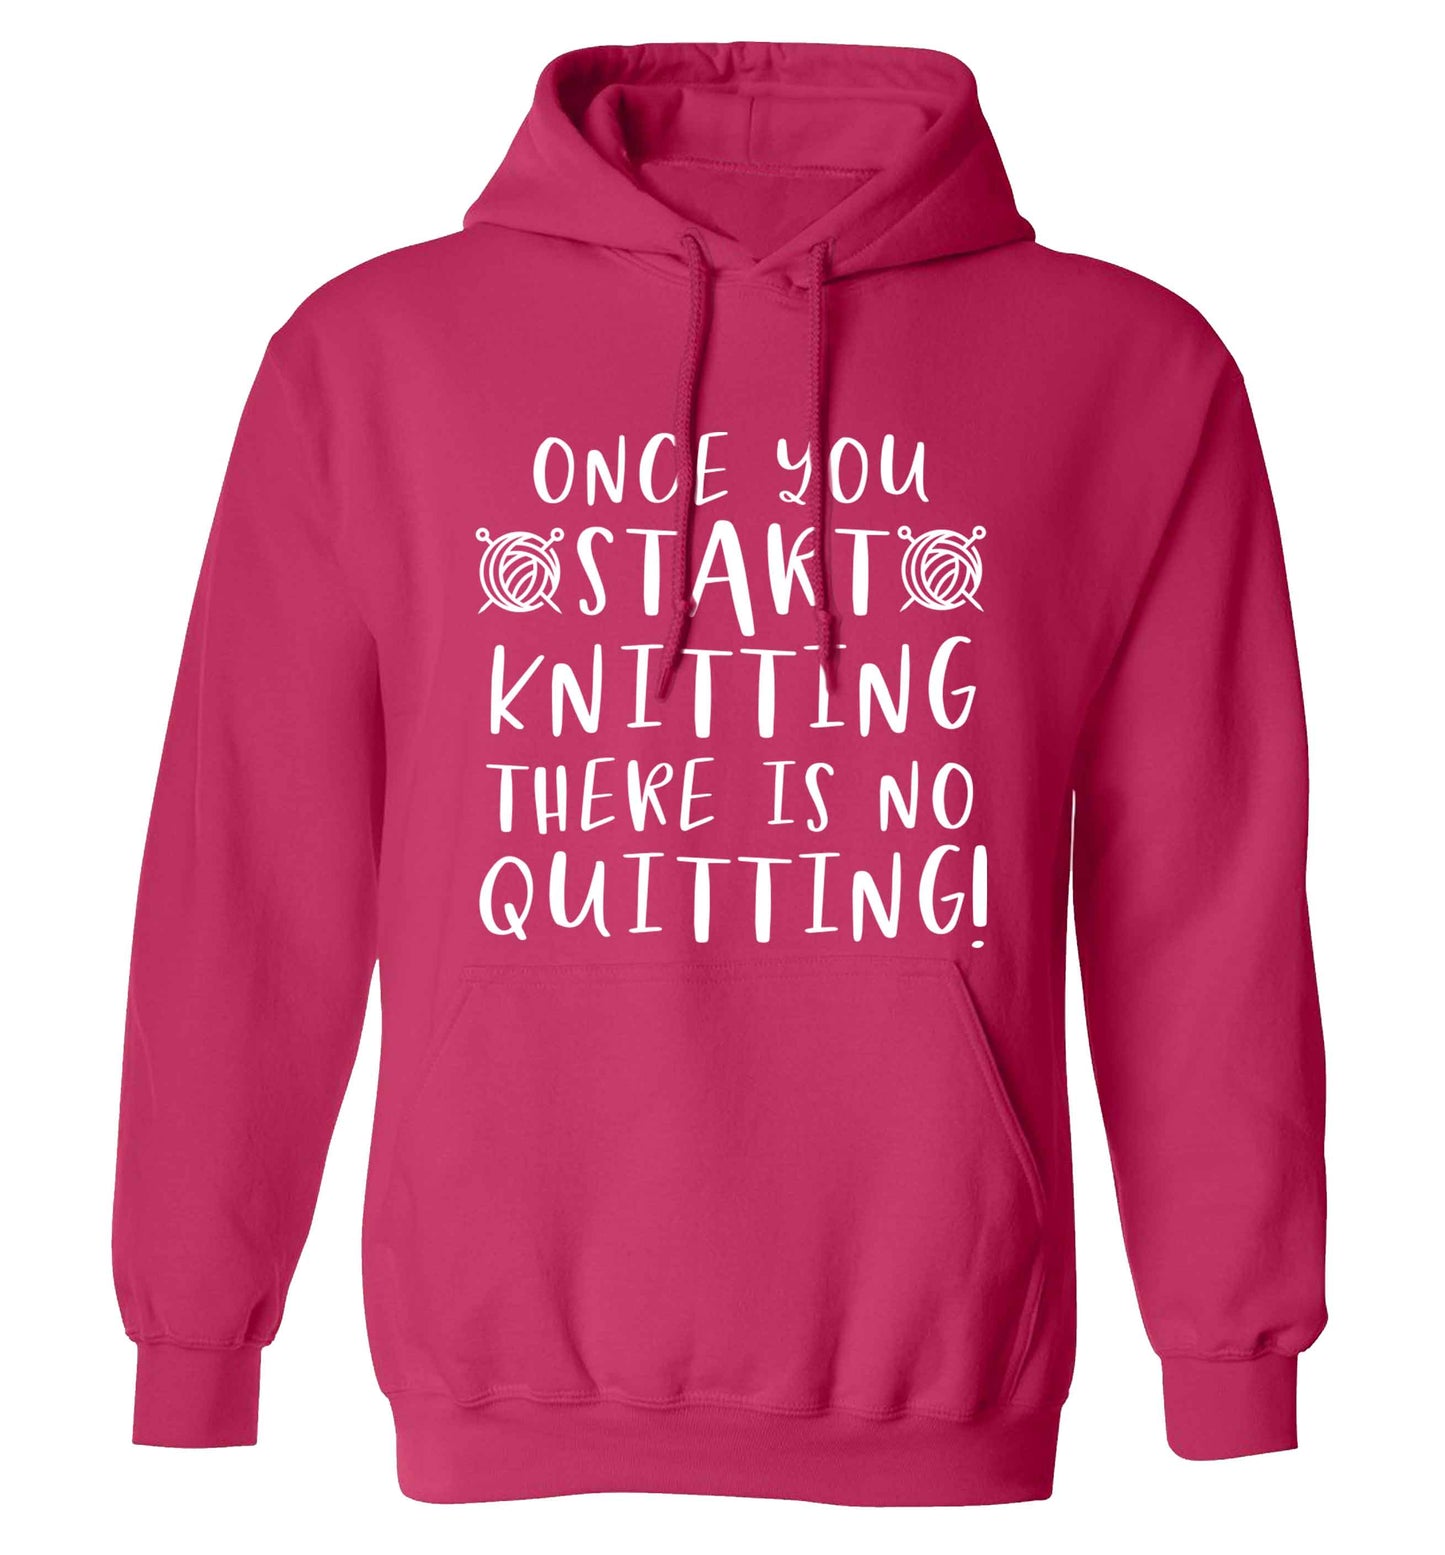 Once you start knitting there is no quitting! adults unisex pink hoodie 2XL